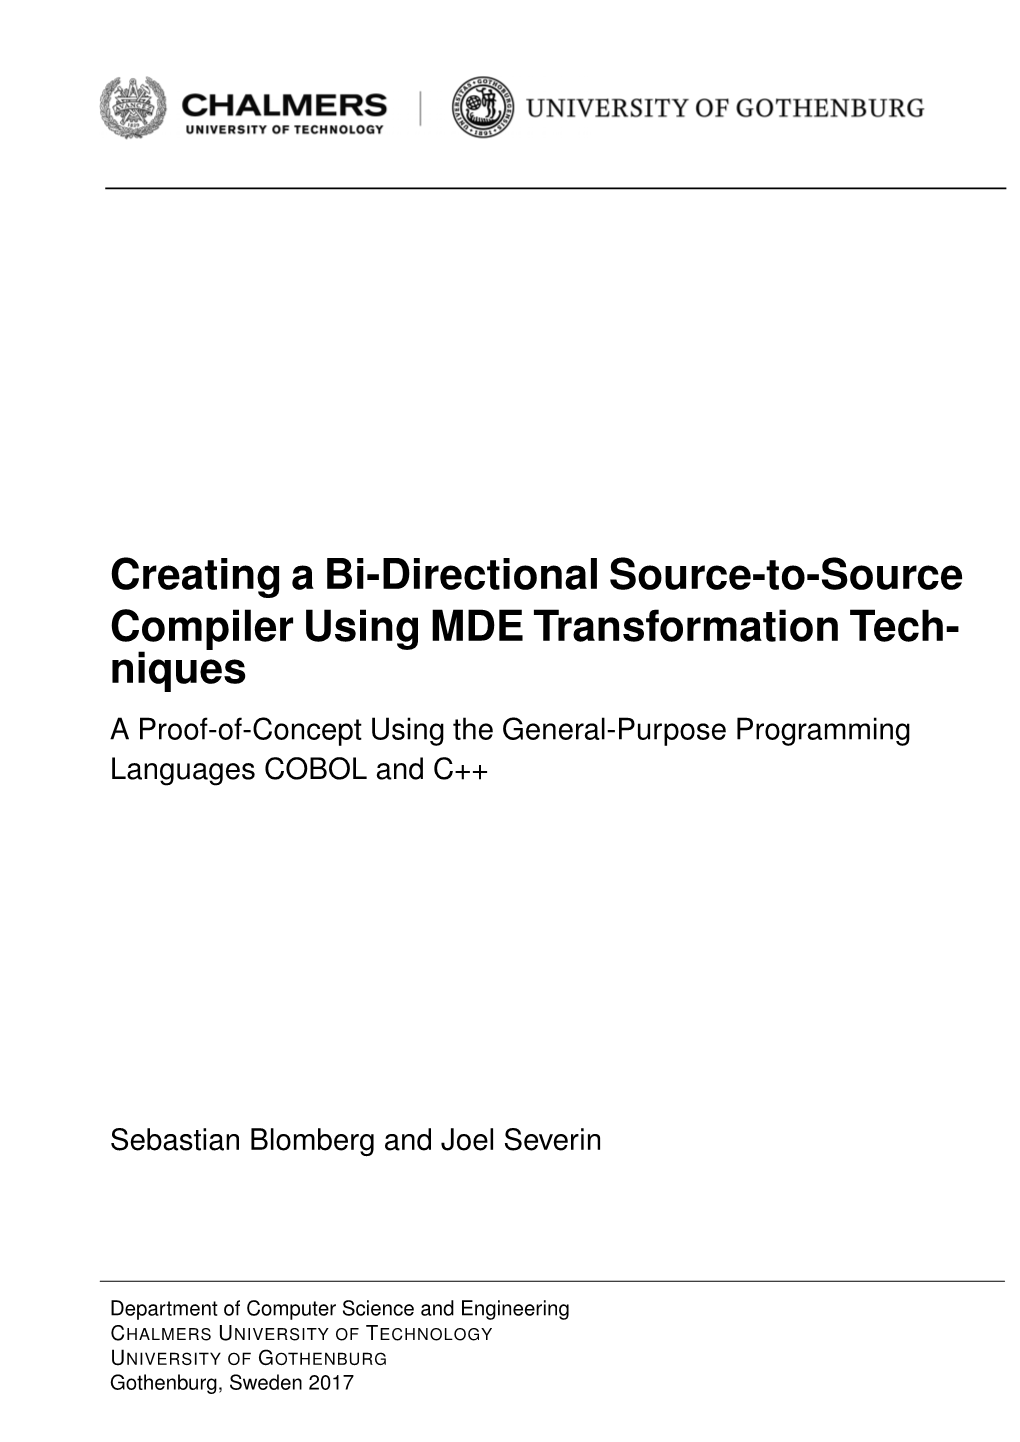 Creating a Bi-Directional Source-To-Source Compiler Using